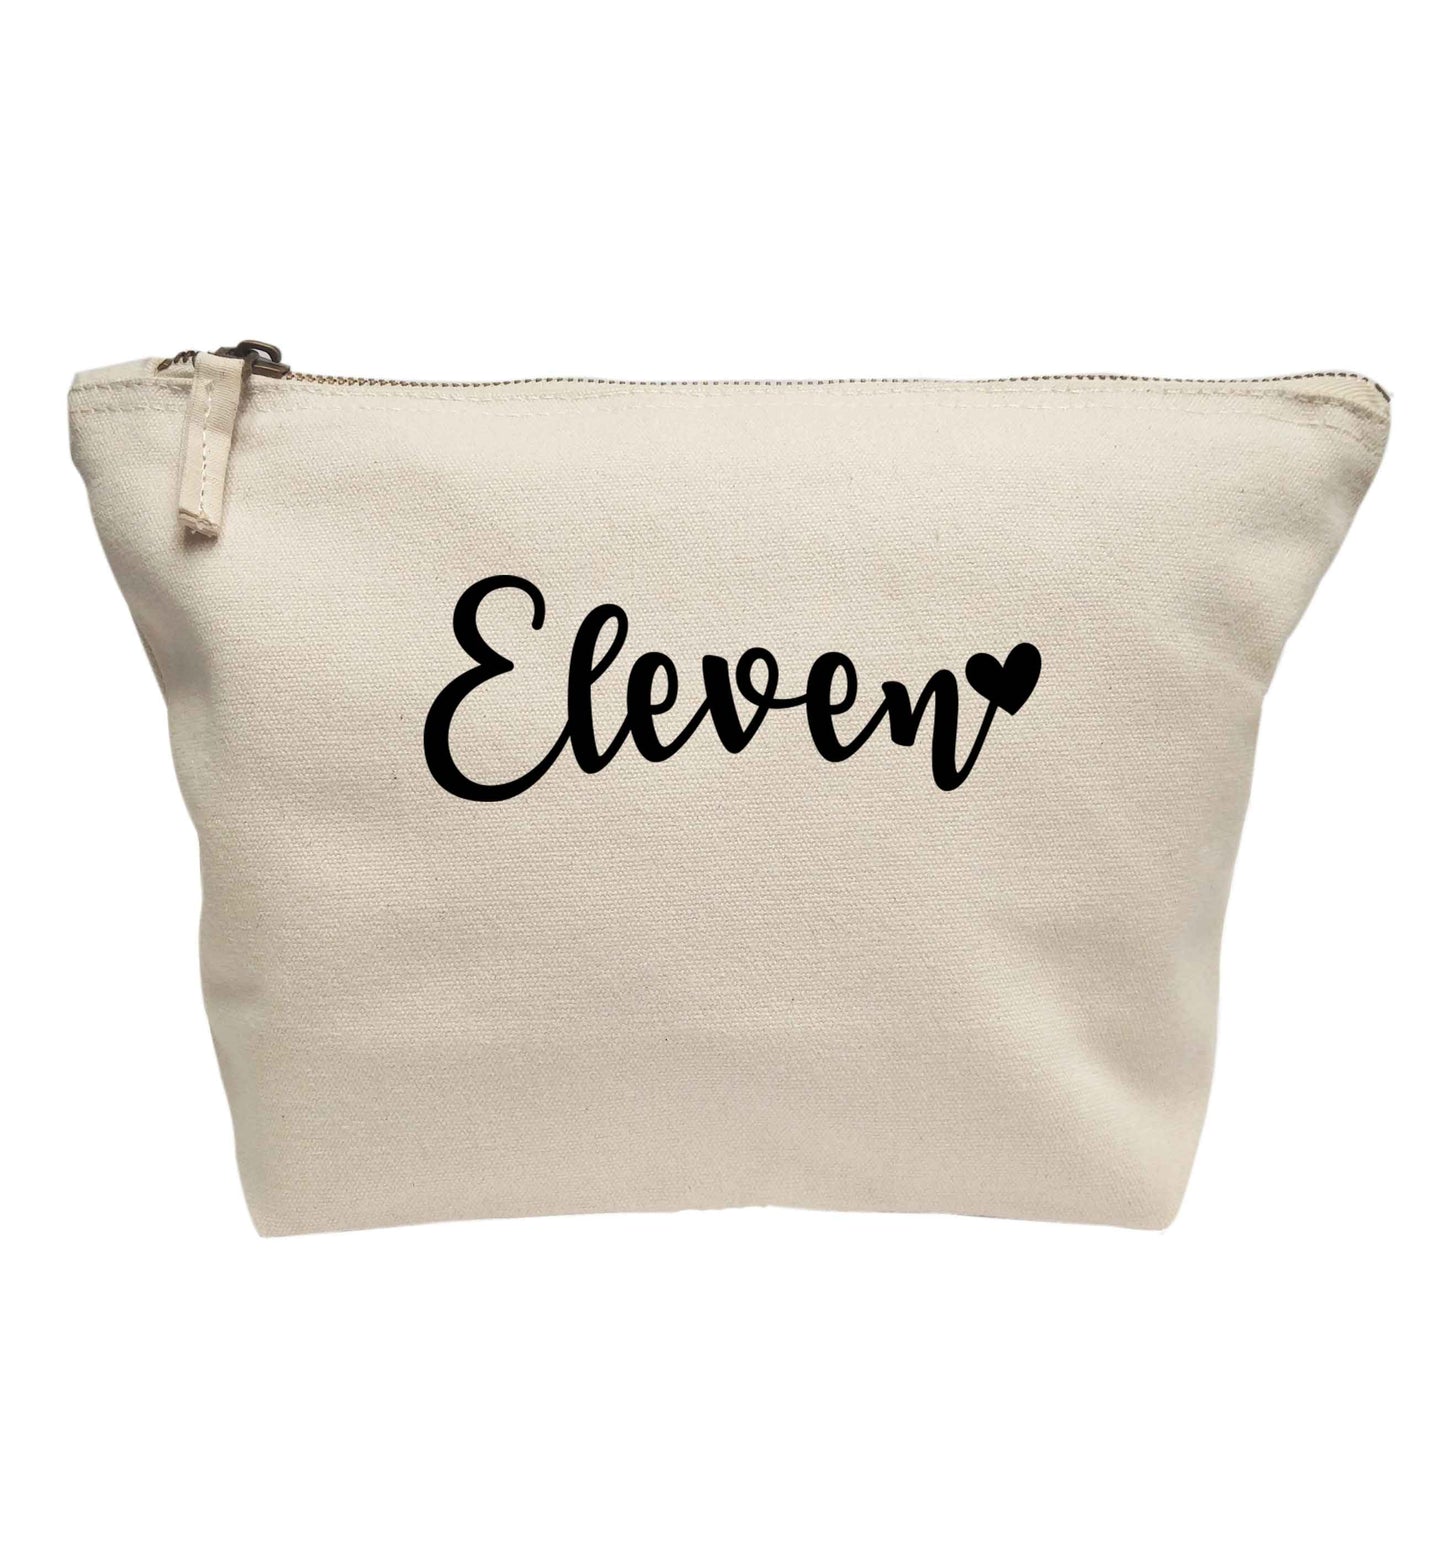 Eleven and heart! | Makeup / wash bag